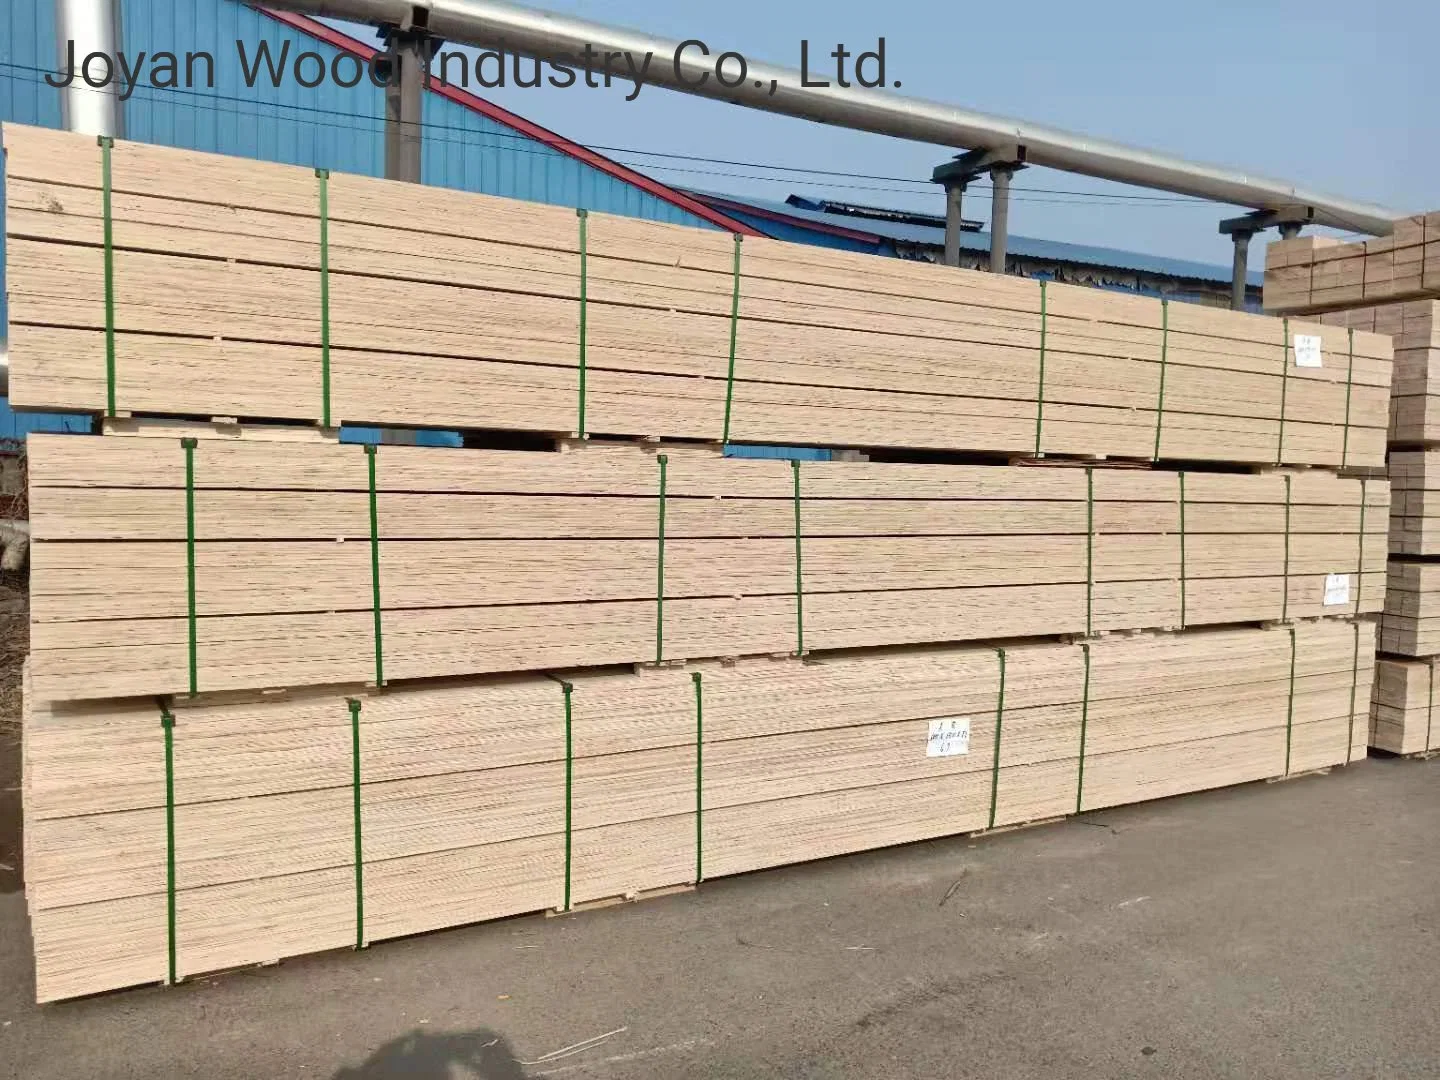 18mm 25mm Insulation/Laminated Compressed Plywood Wood for Transformer Insulation Cut Poplar Plywood Wood for Laser Cut Sheet